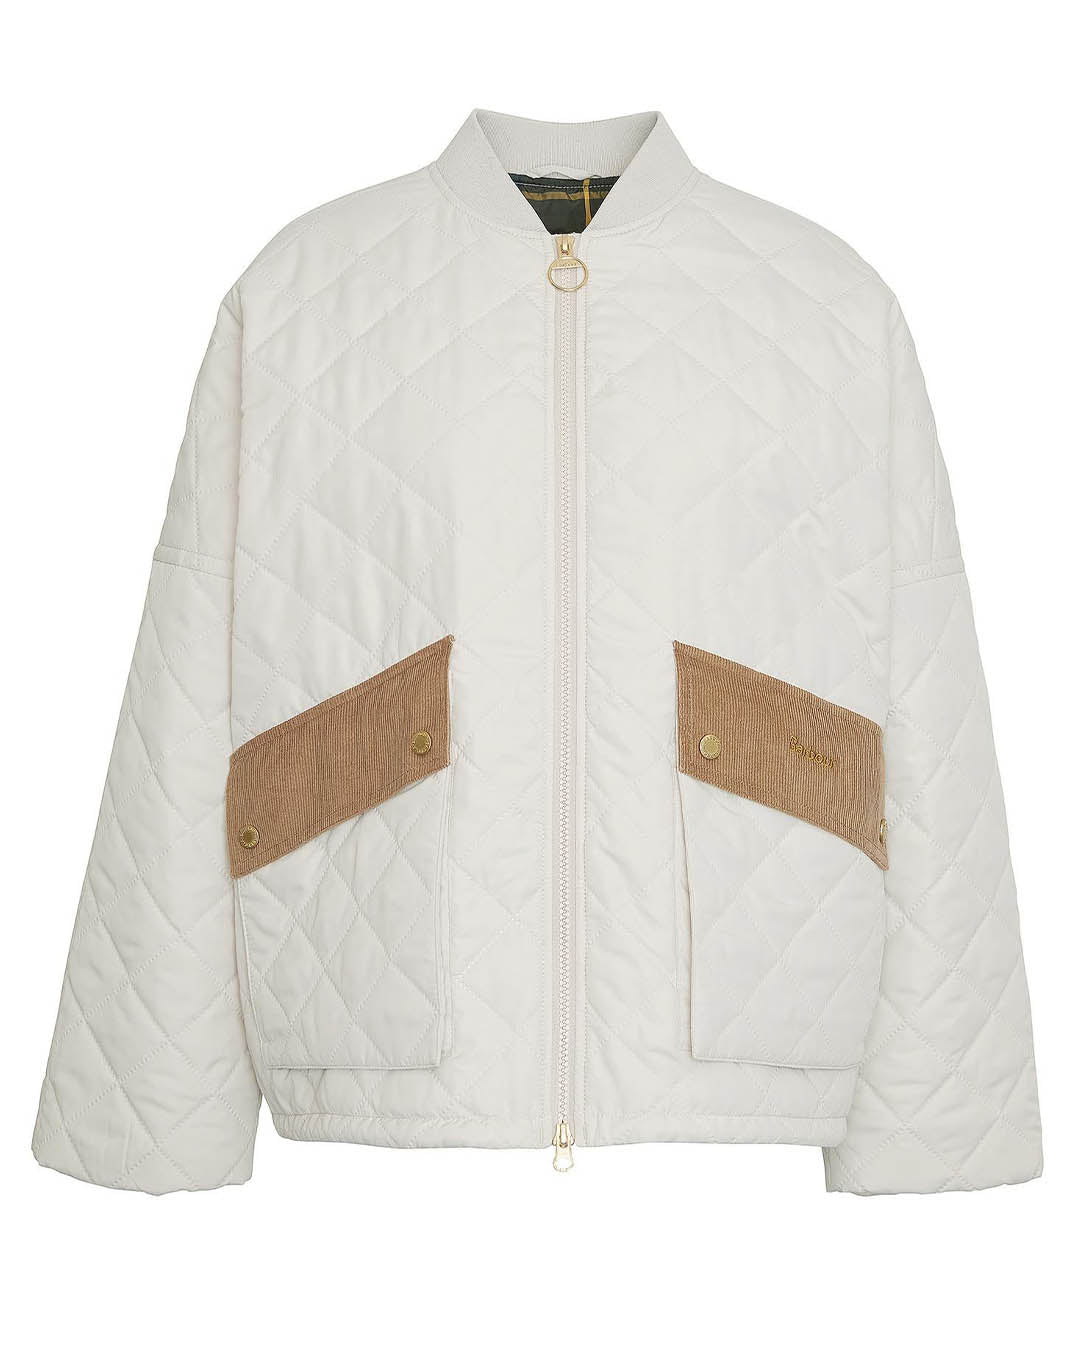 Barbour Bowhill Quilt